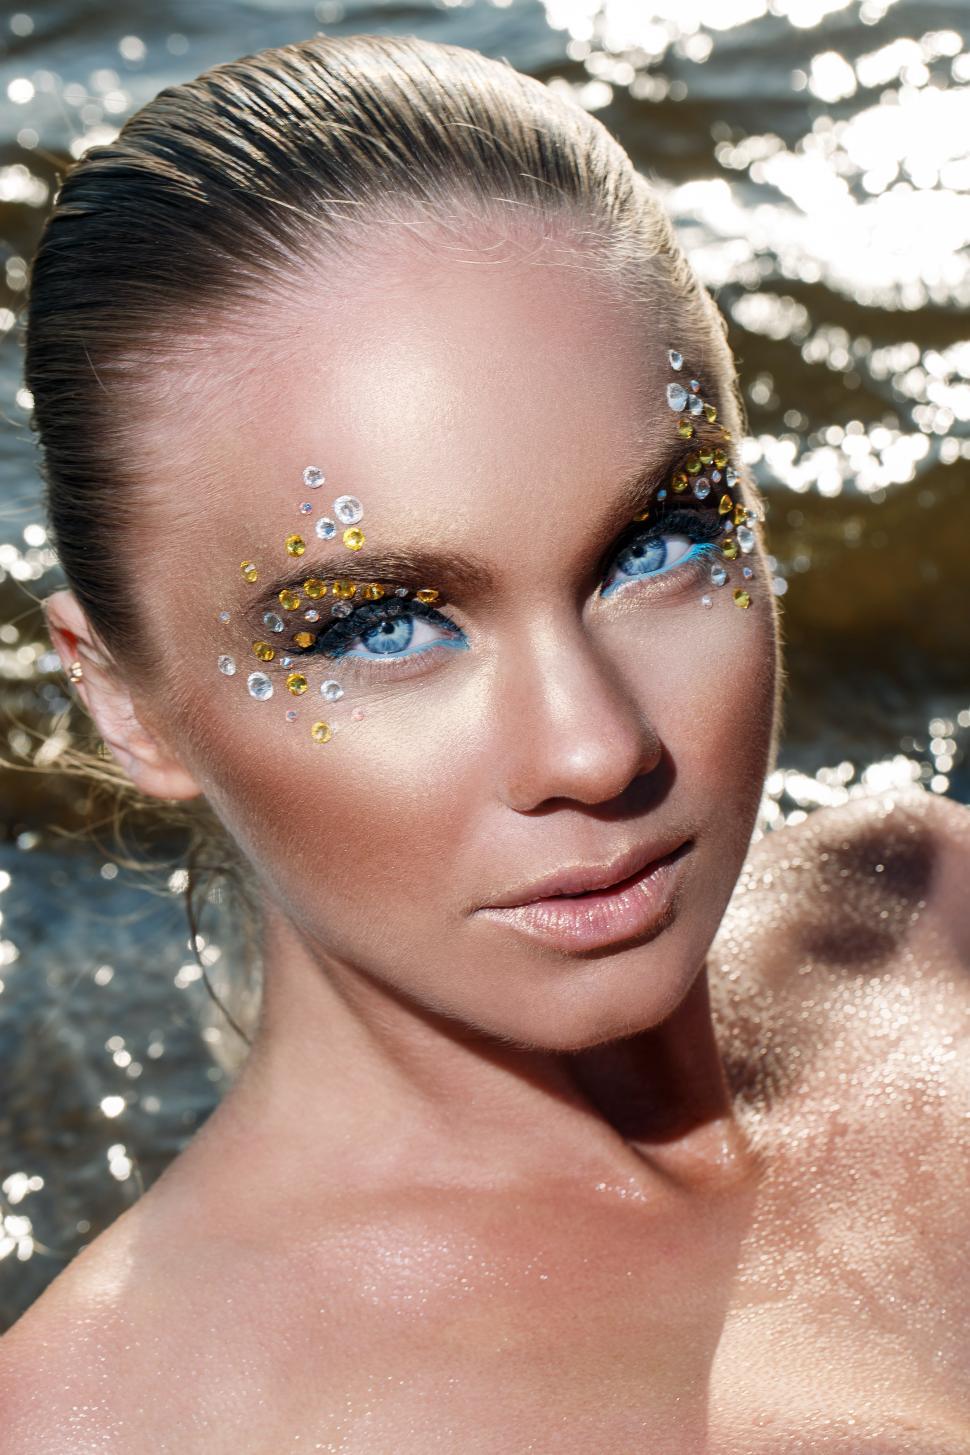 Free Image of Woman with sparking makeup at beach 